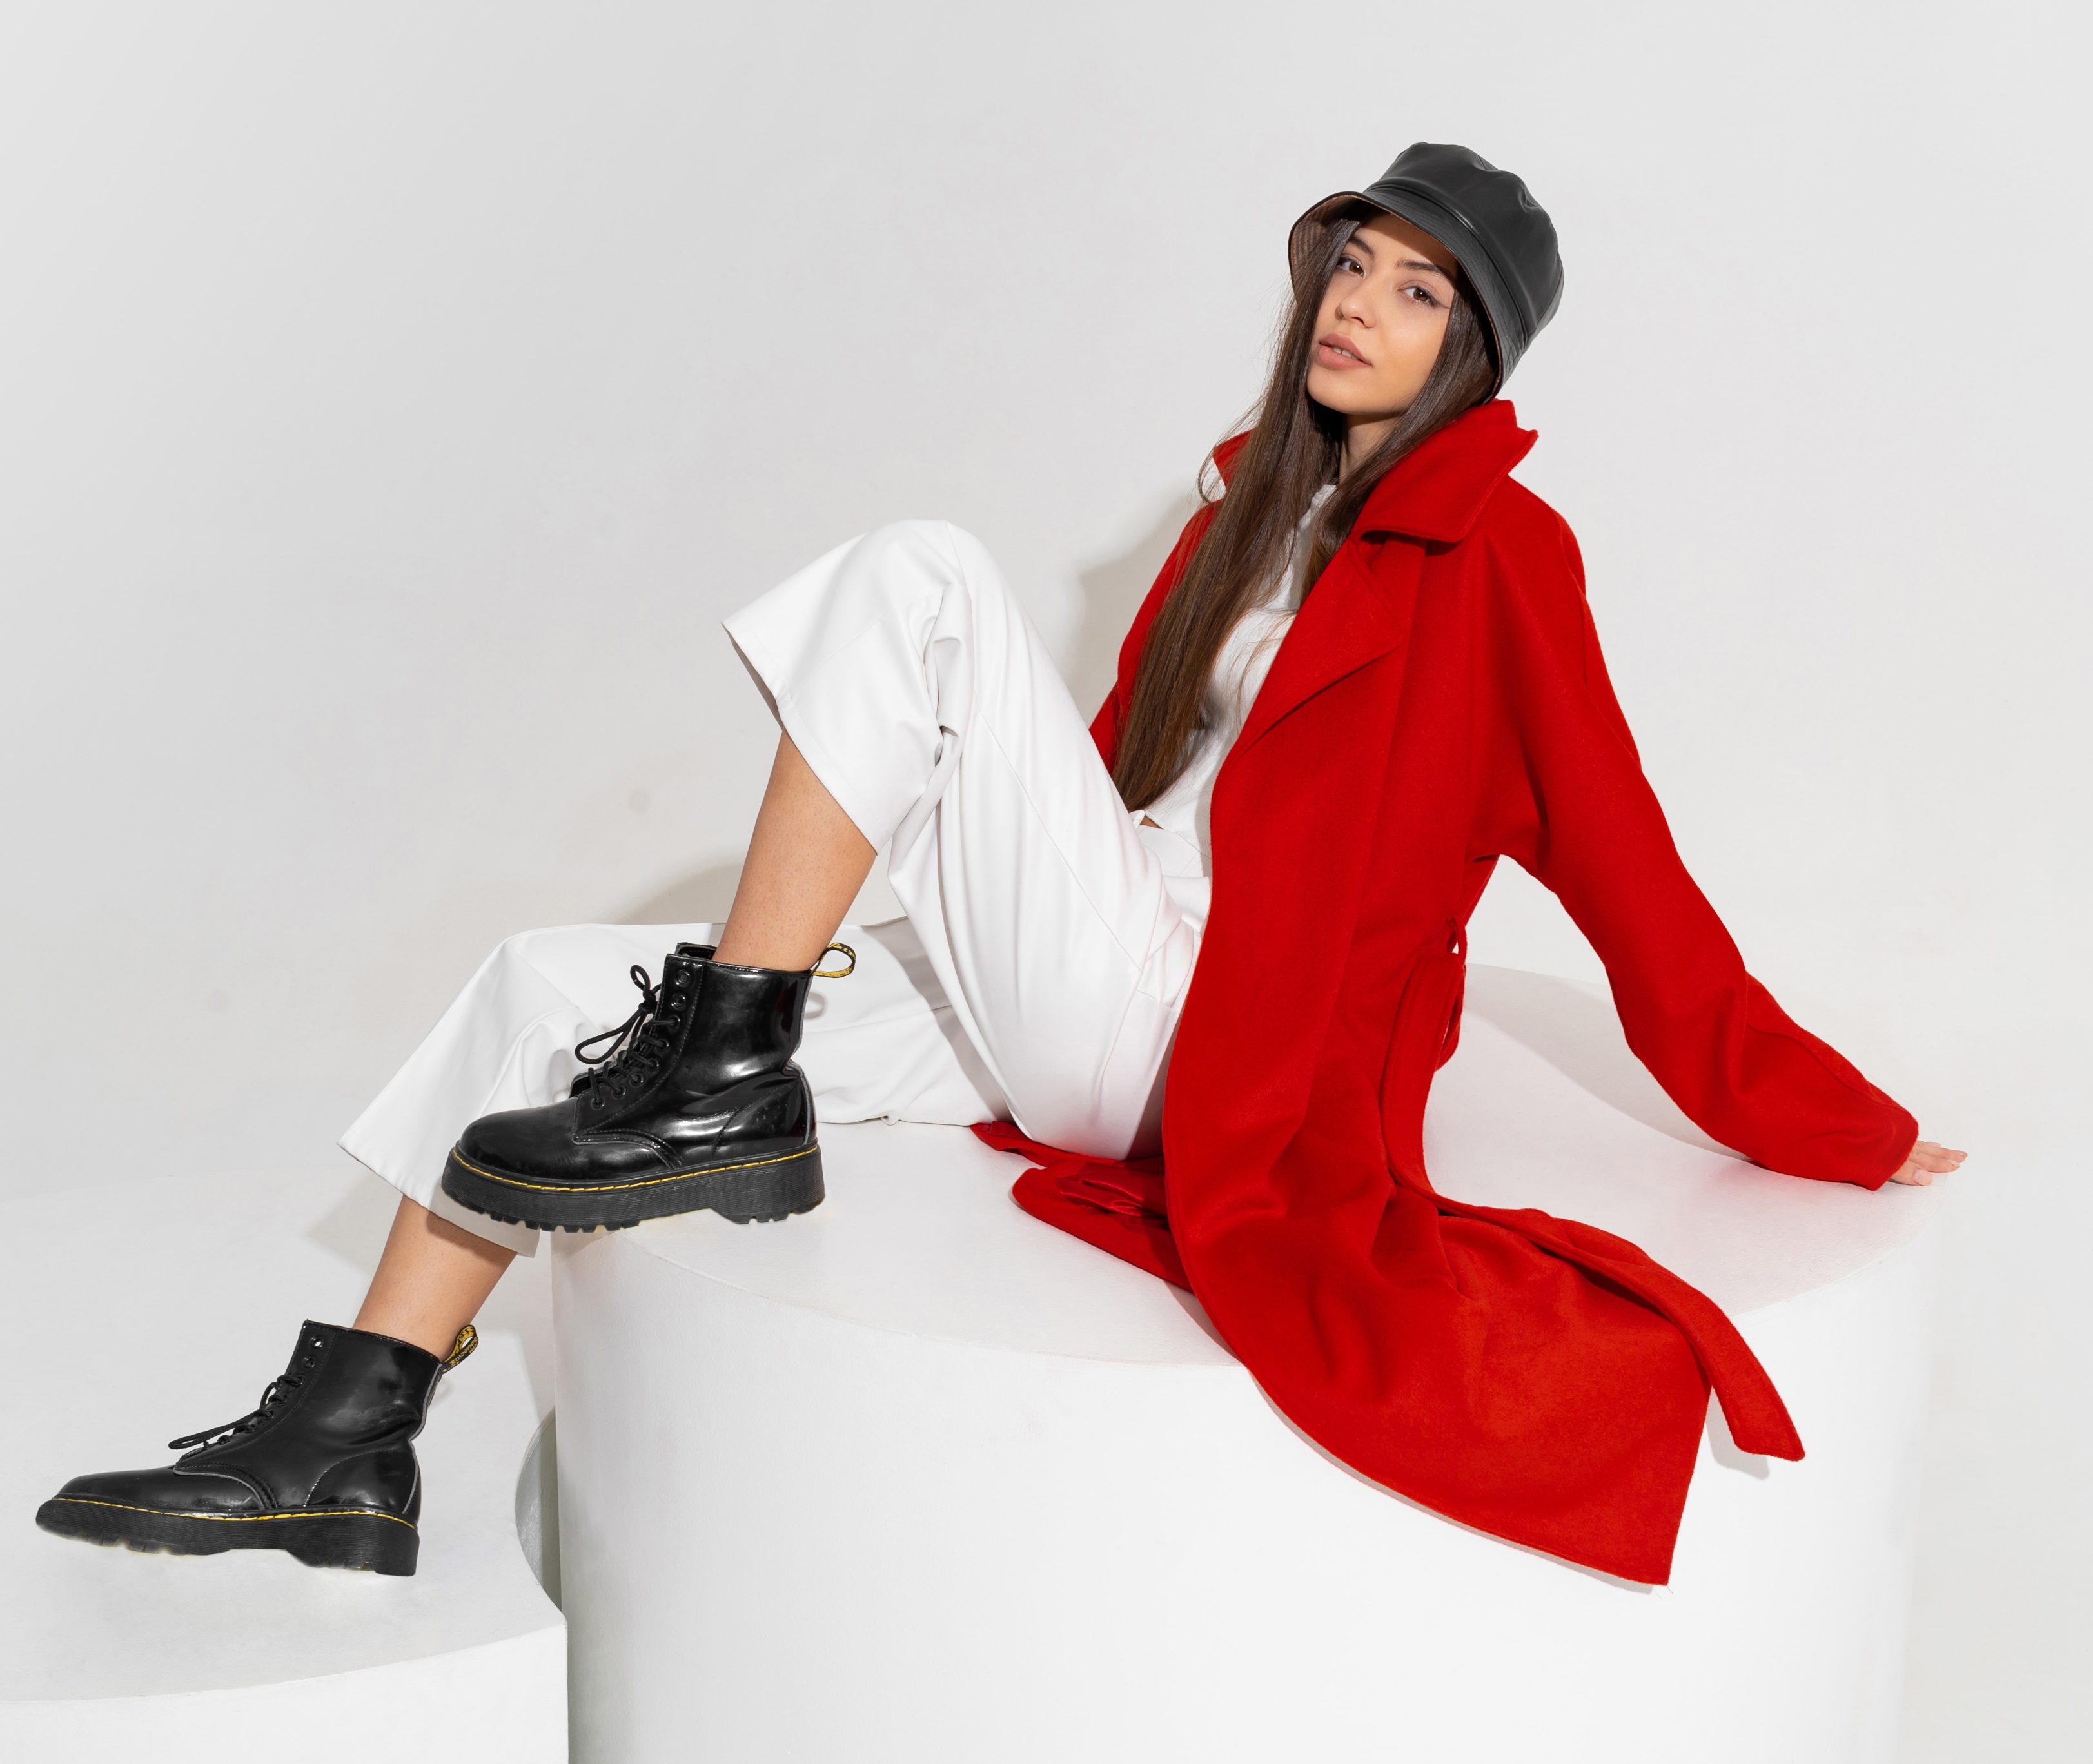 Whole white outfit Look Styled With Black Ankle Boots and Red Coat